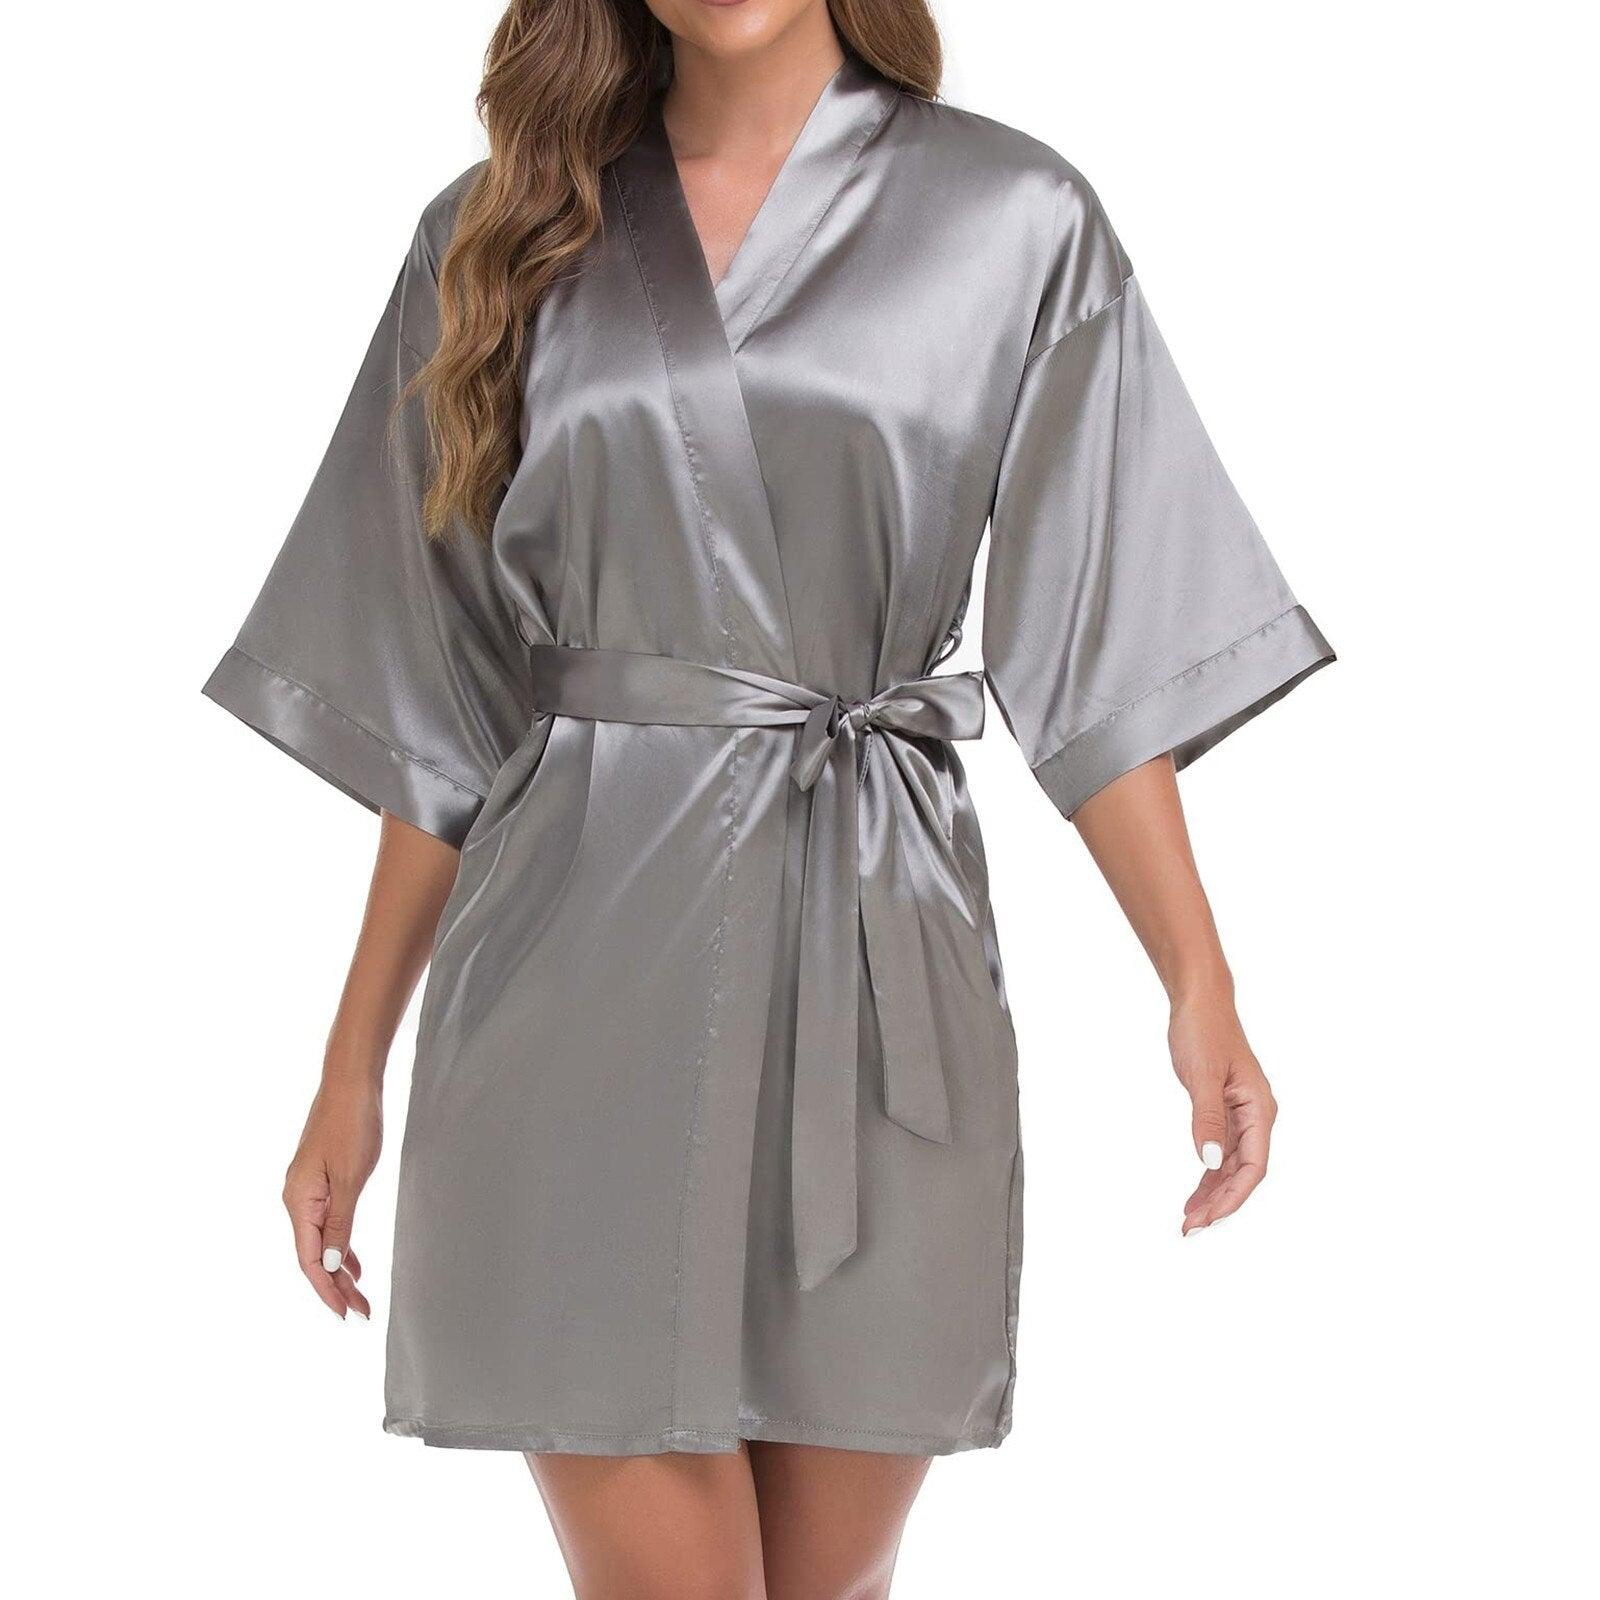 Satin Gowns For Women